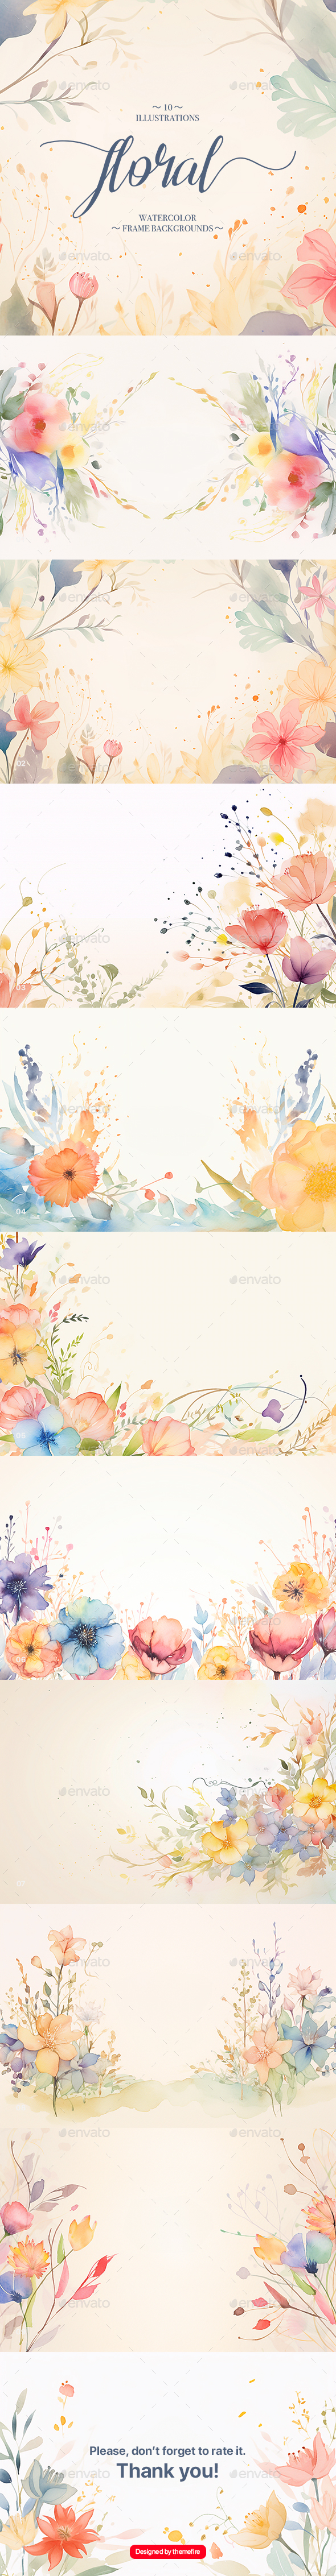 Watercolor Floral Border Backgrounds